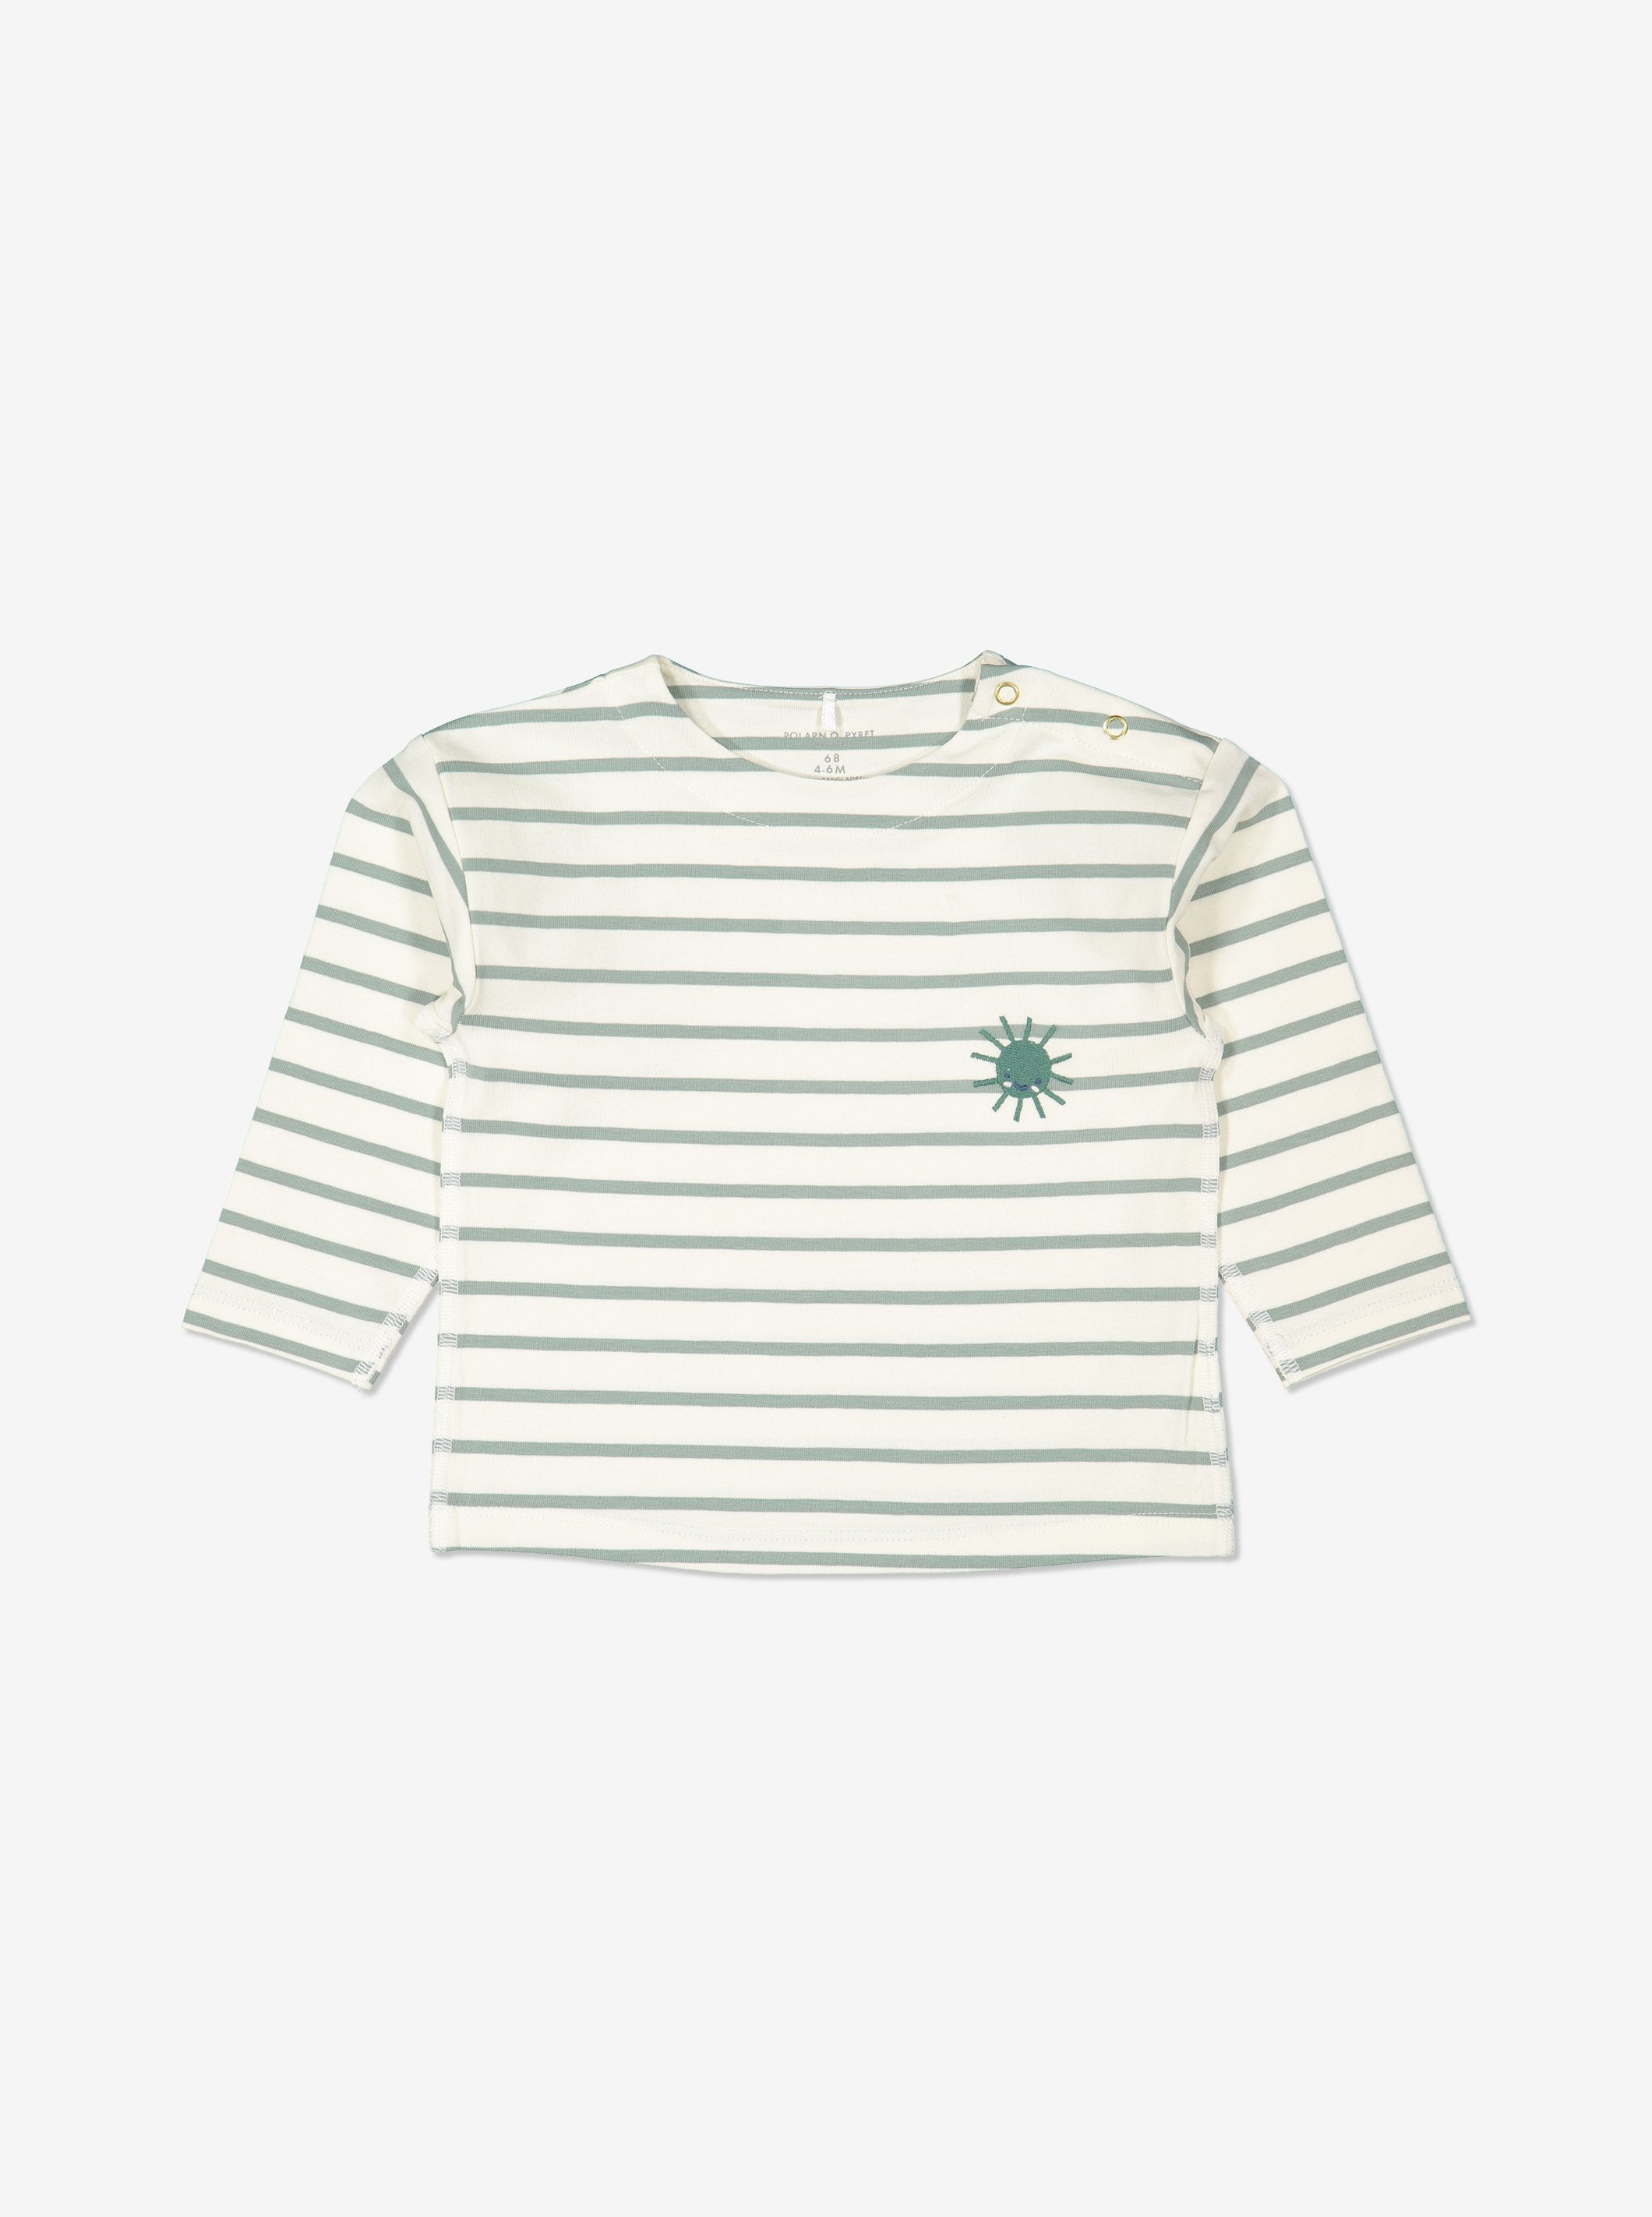 Striped Baby Top